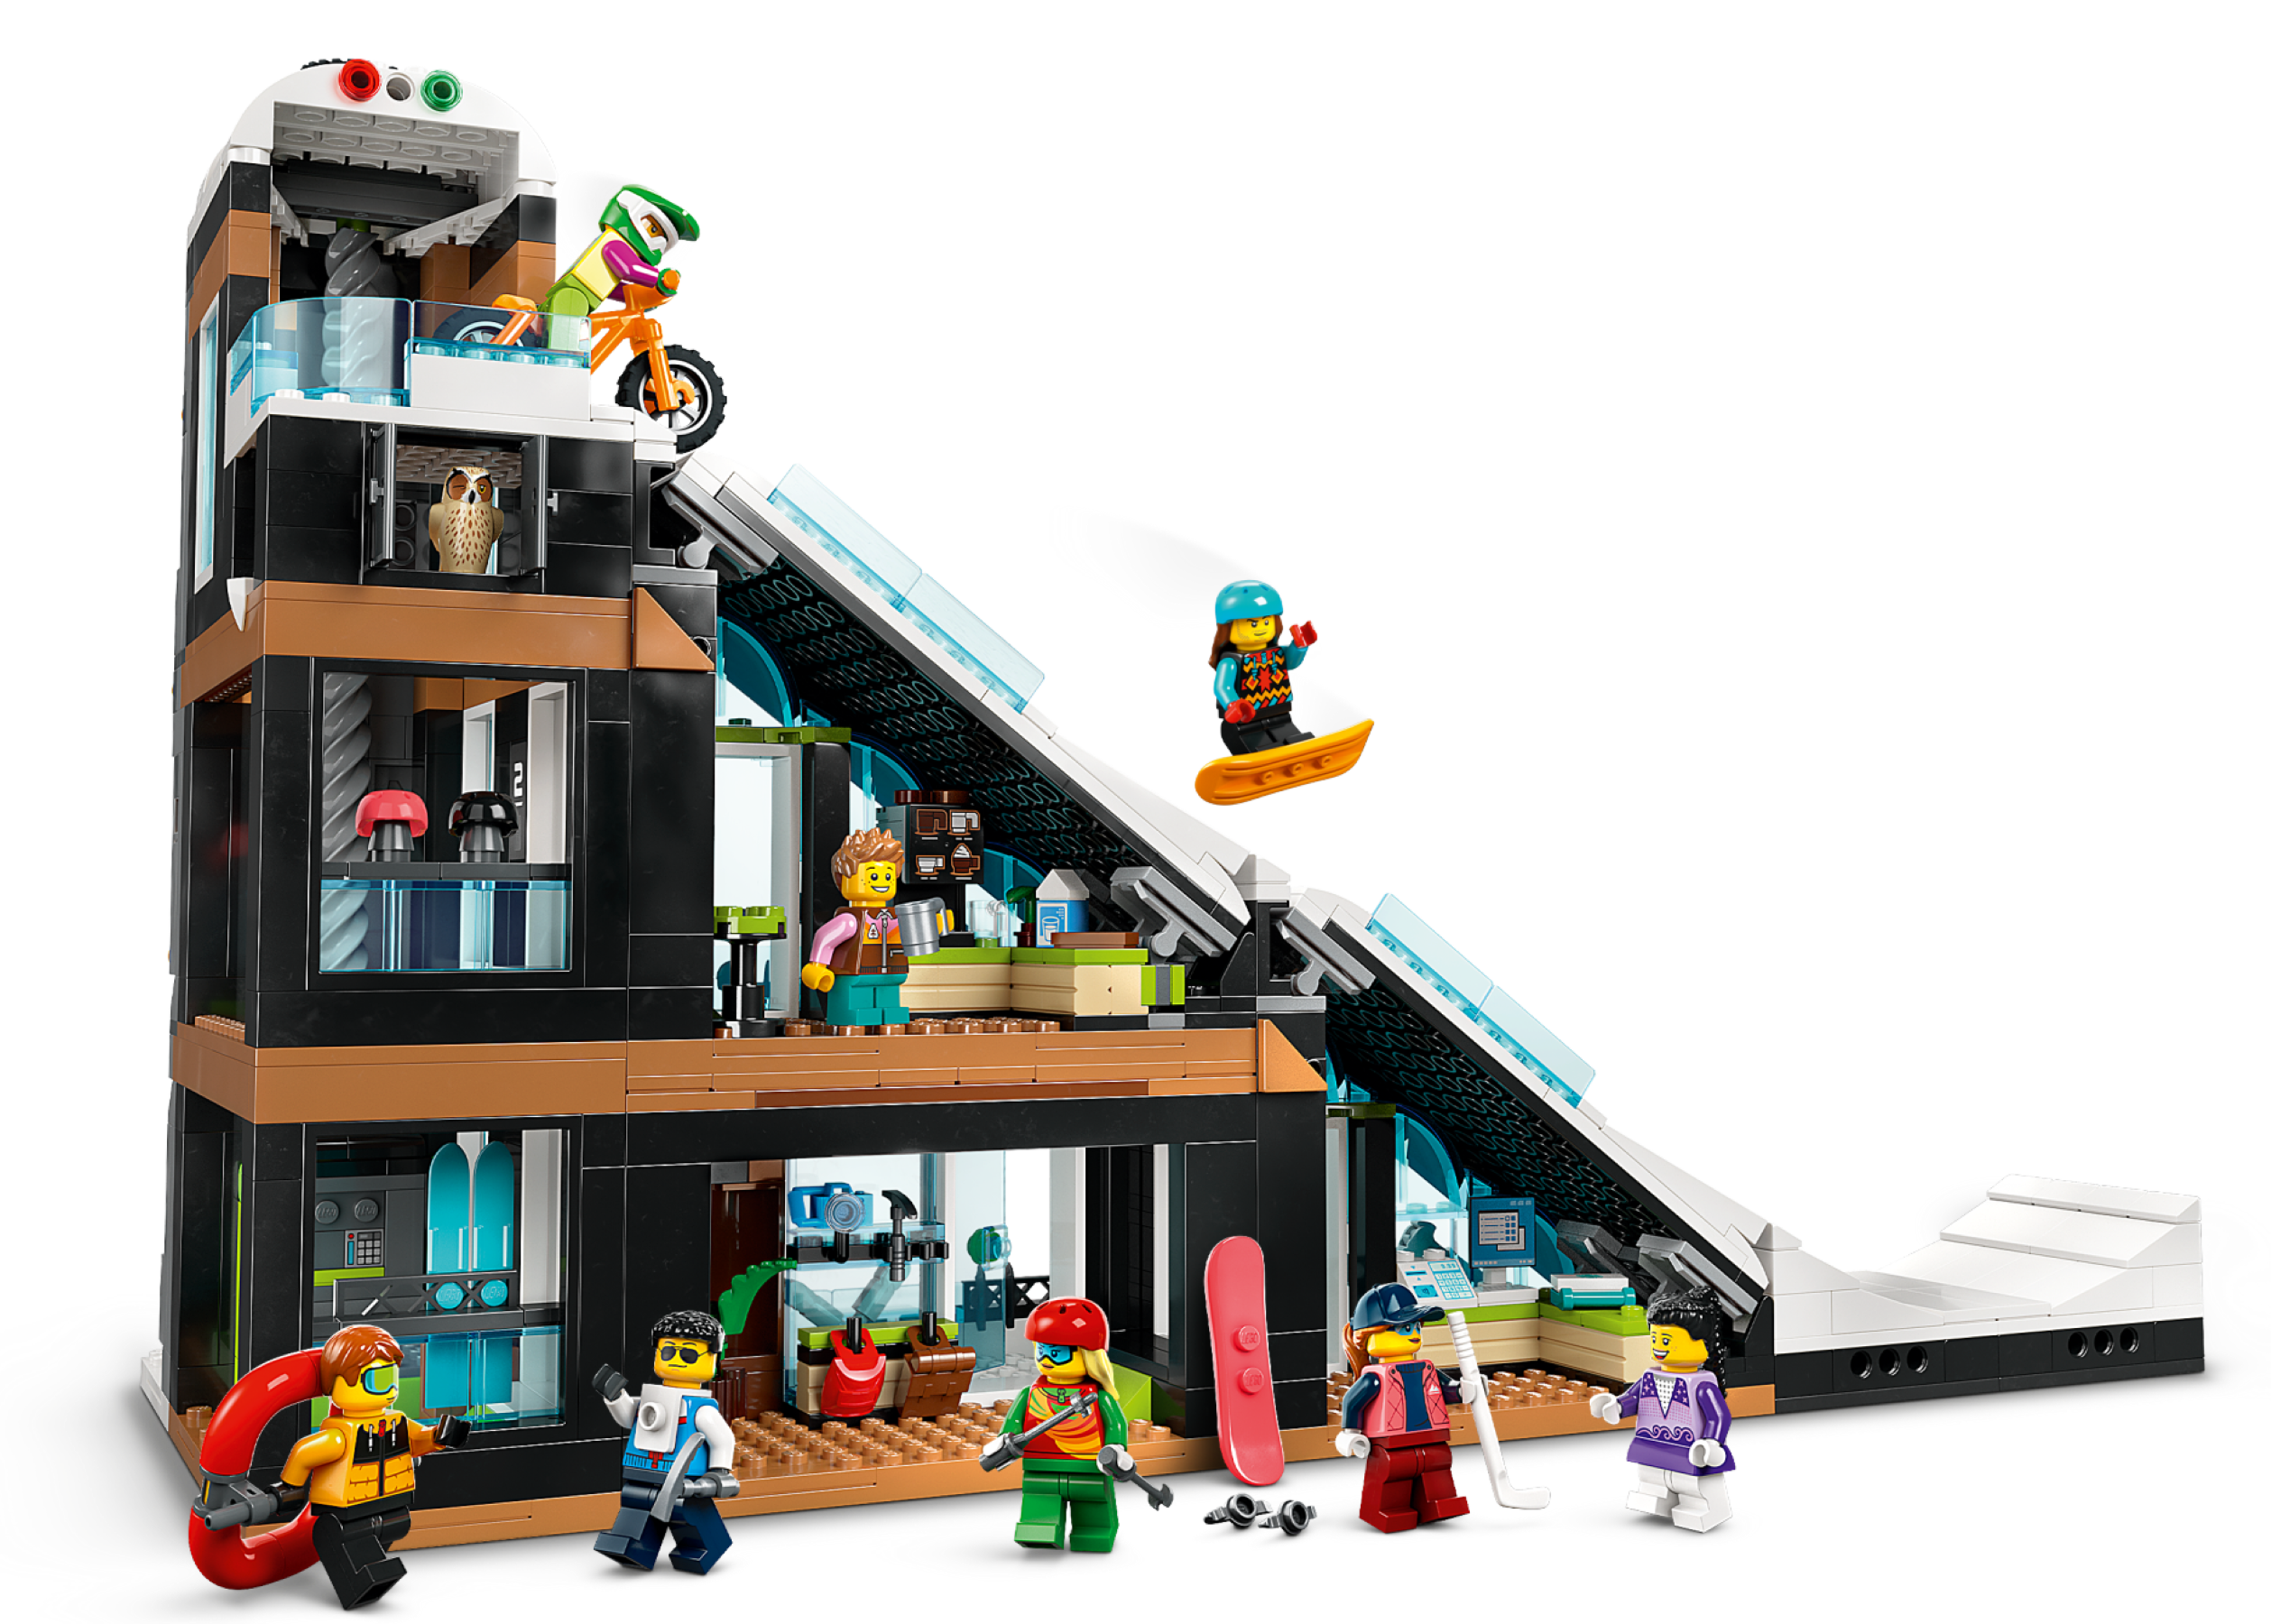 Ski and Climbing Center 60366 | City | Buy online at the Official LEGO®  Shop US